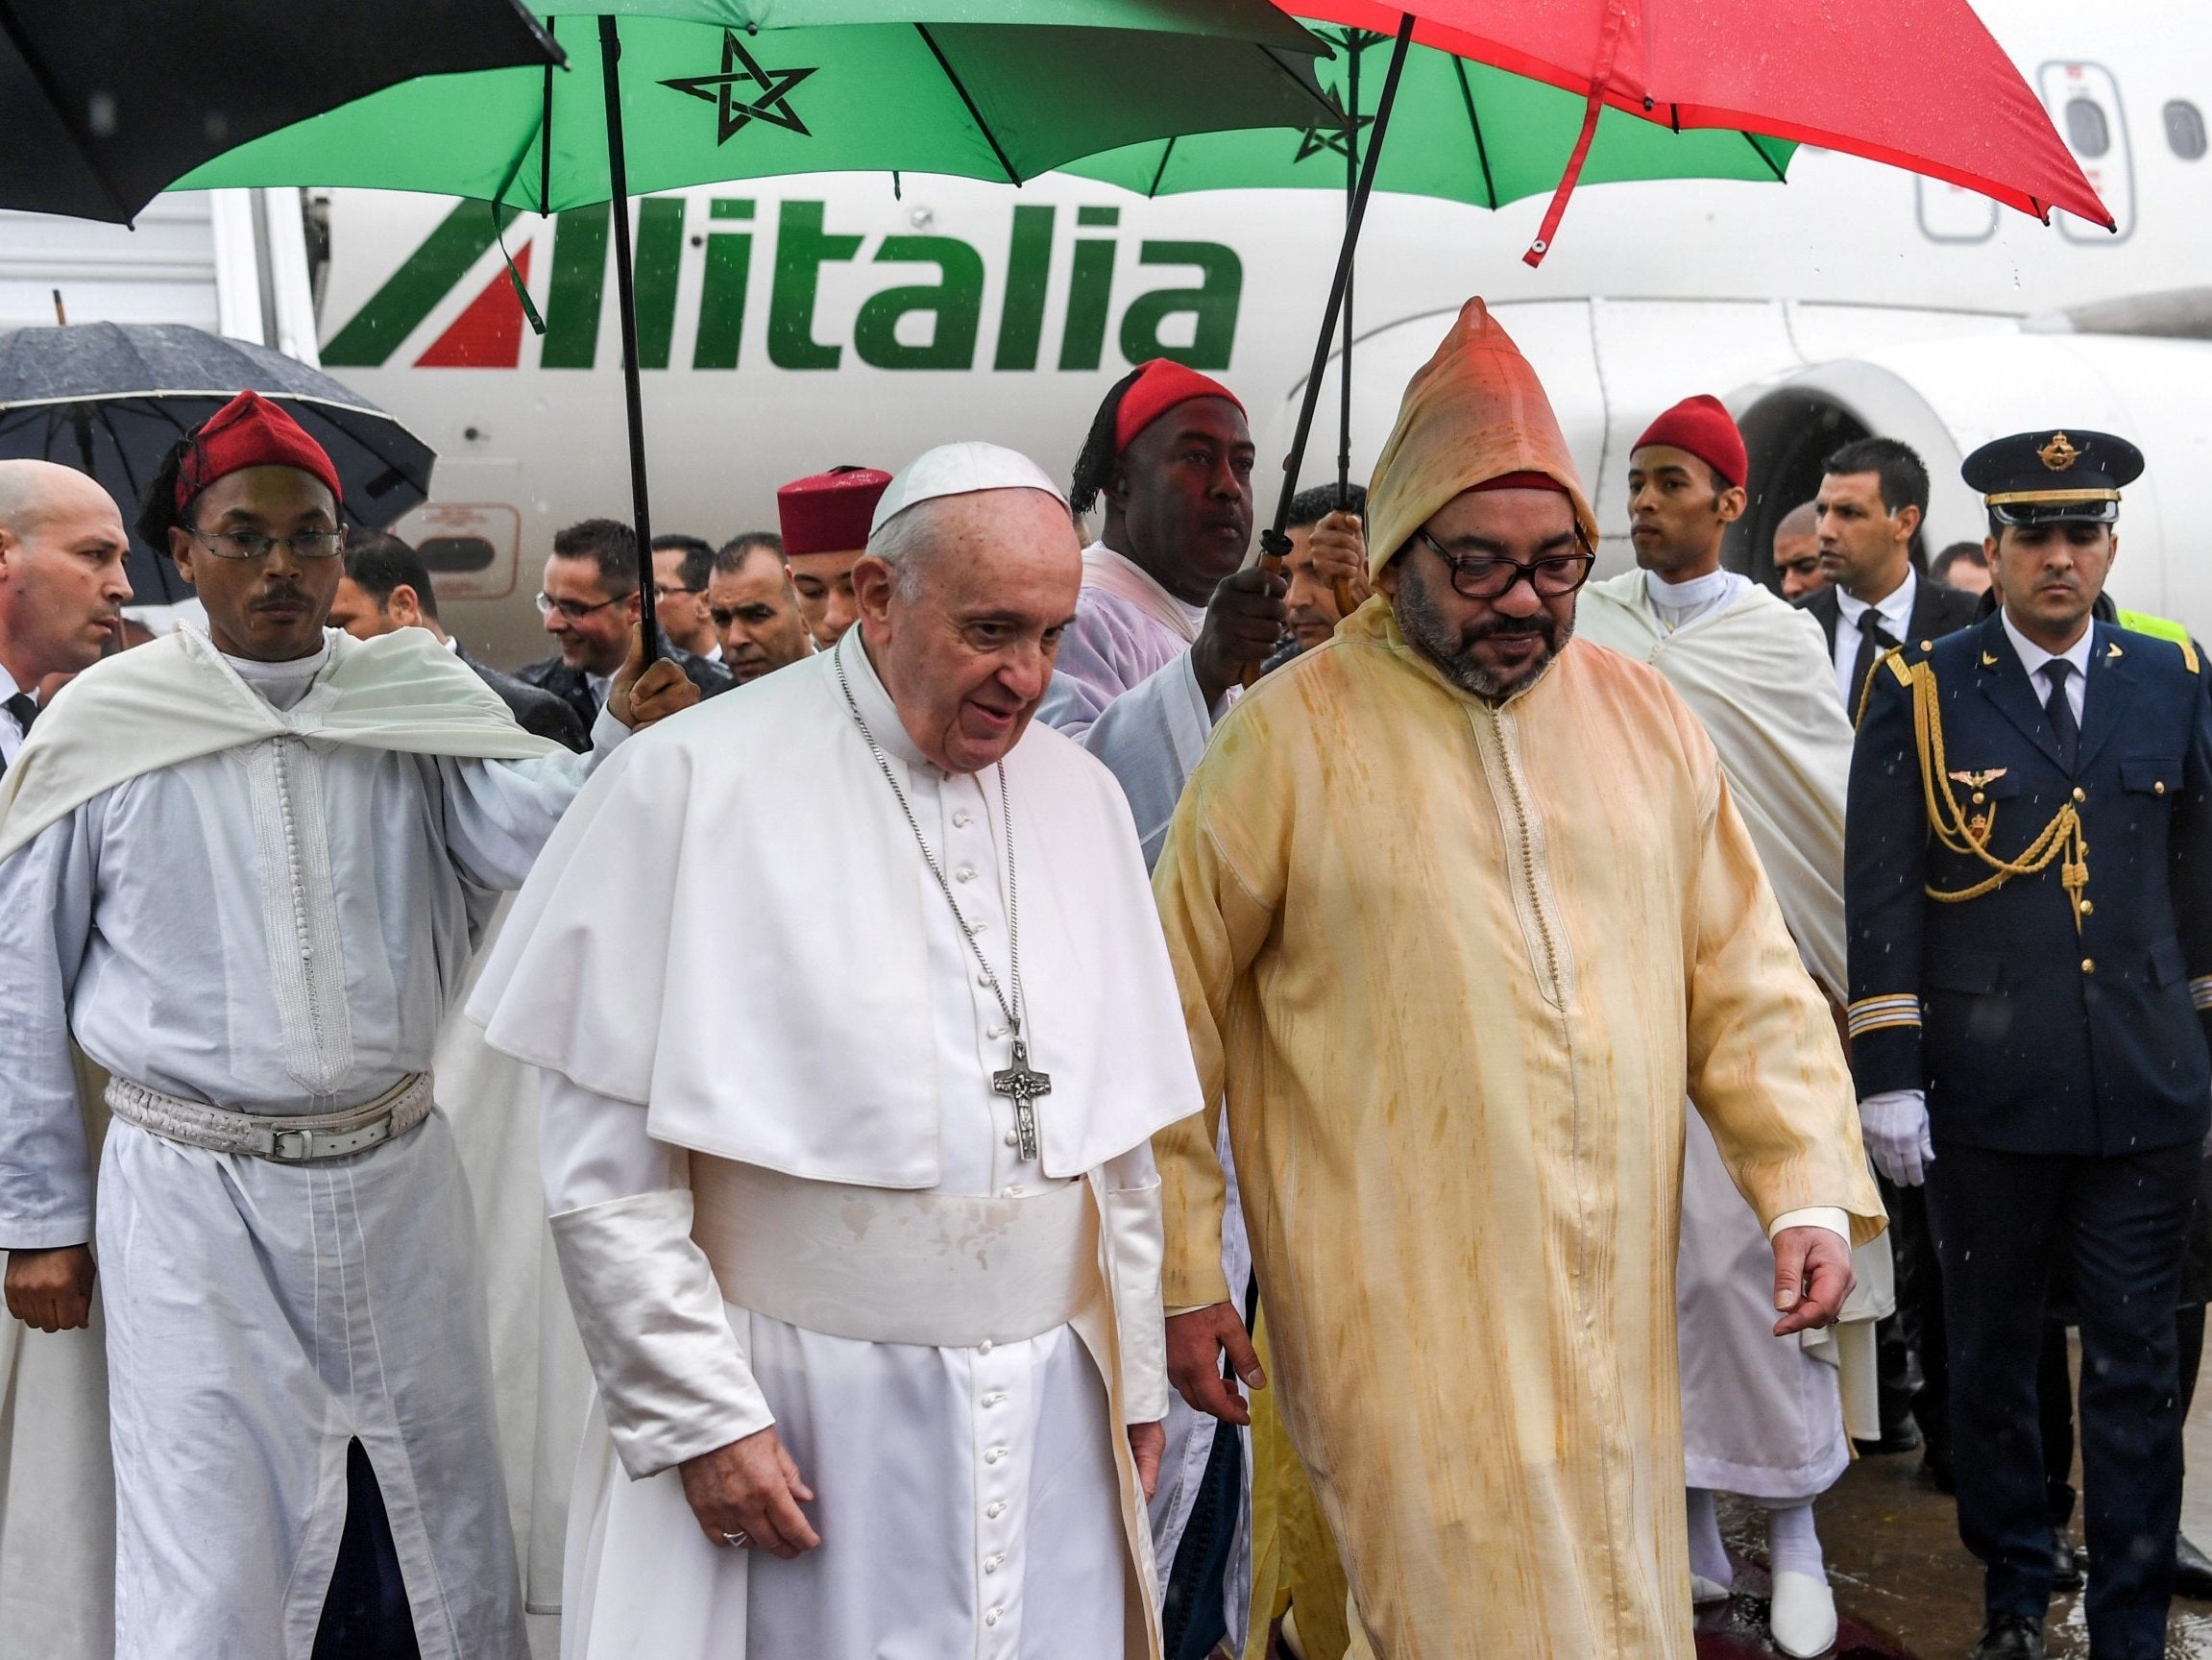 The pope was received by Mohammed VI near Rabat.